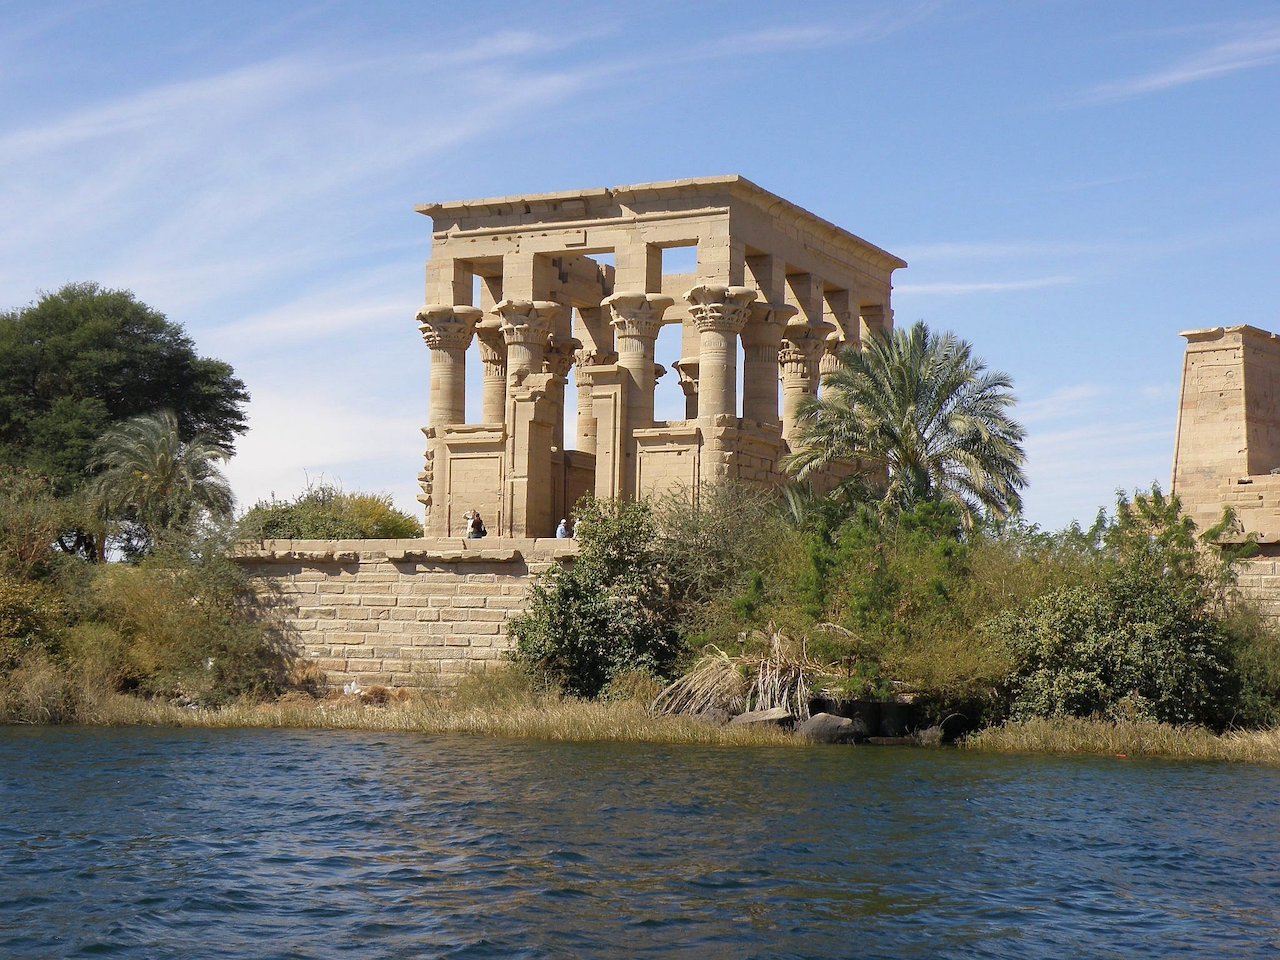 Tempel von Philae. Trajan-Kiosk.By Mmelouk - Own work, CC BY-SA 4.0, https://commons.wikimedia.org/w/index.php?curid=59183988